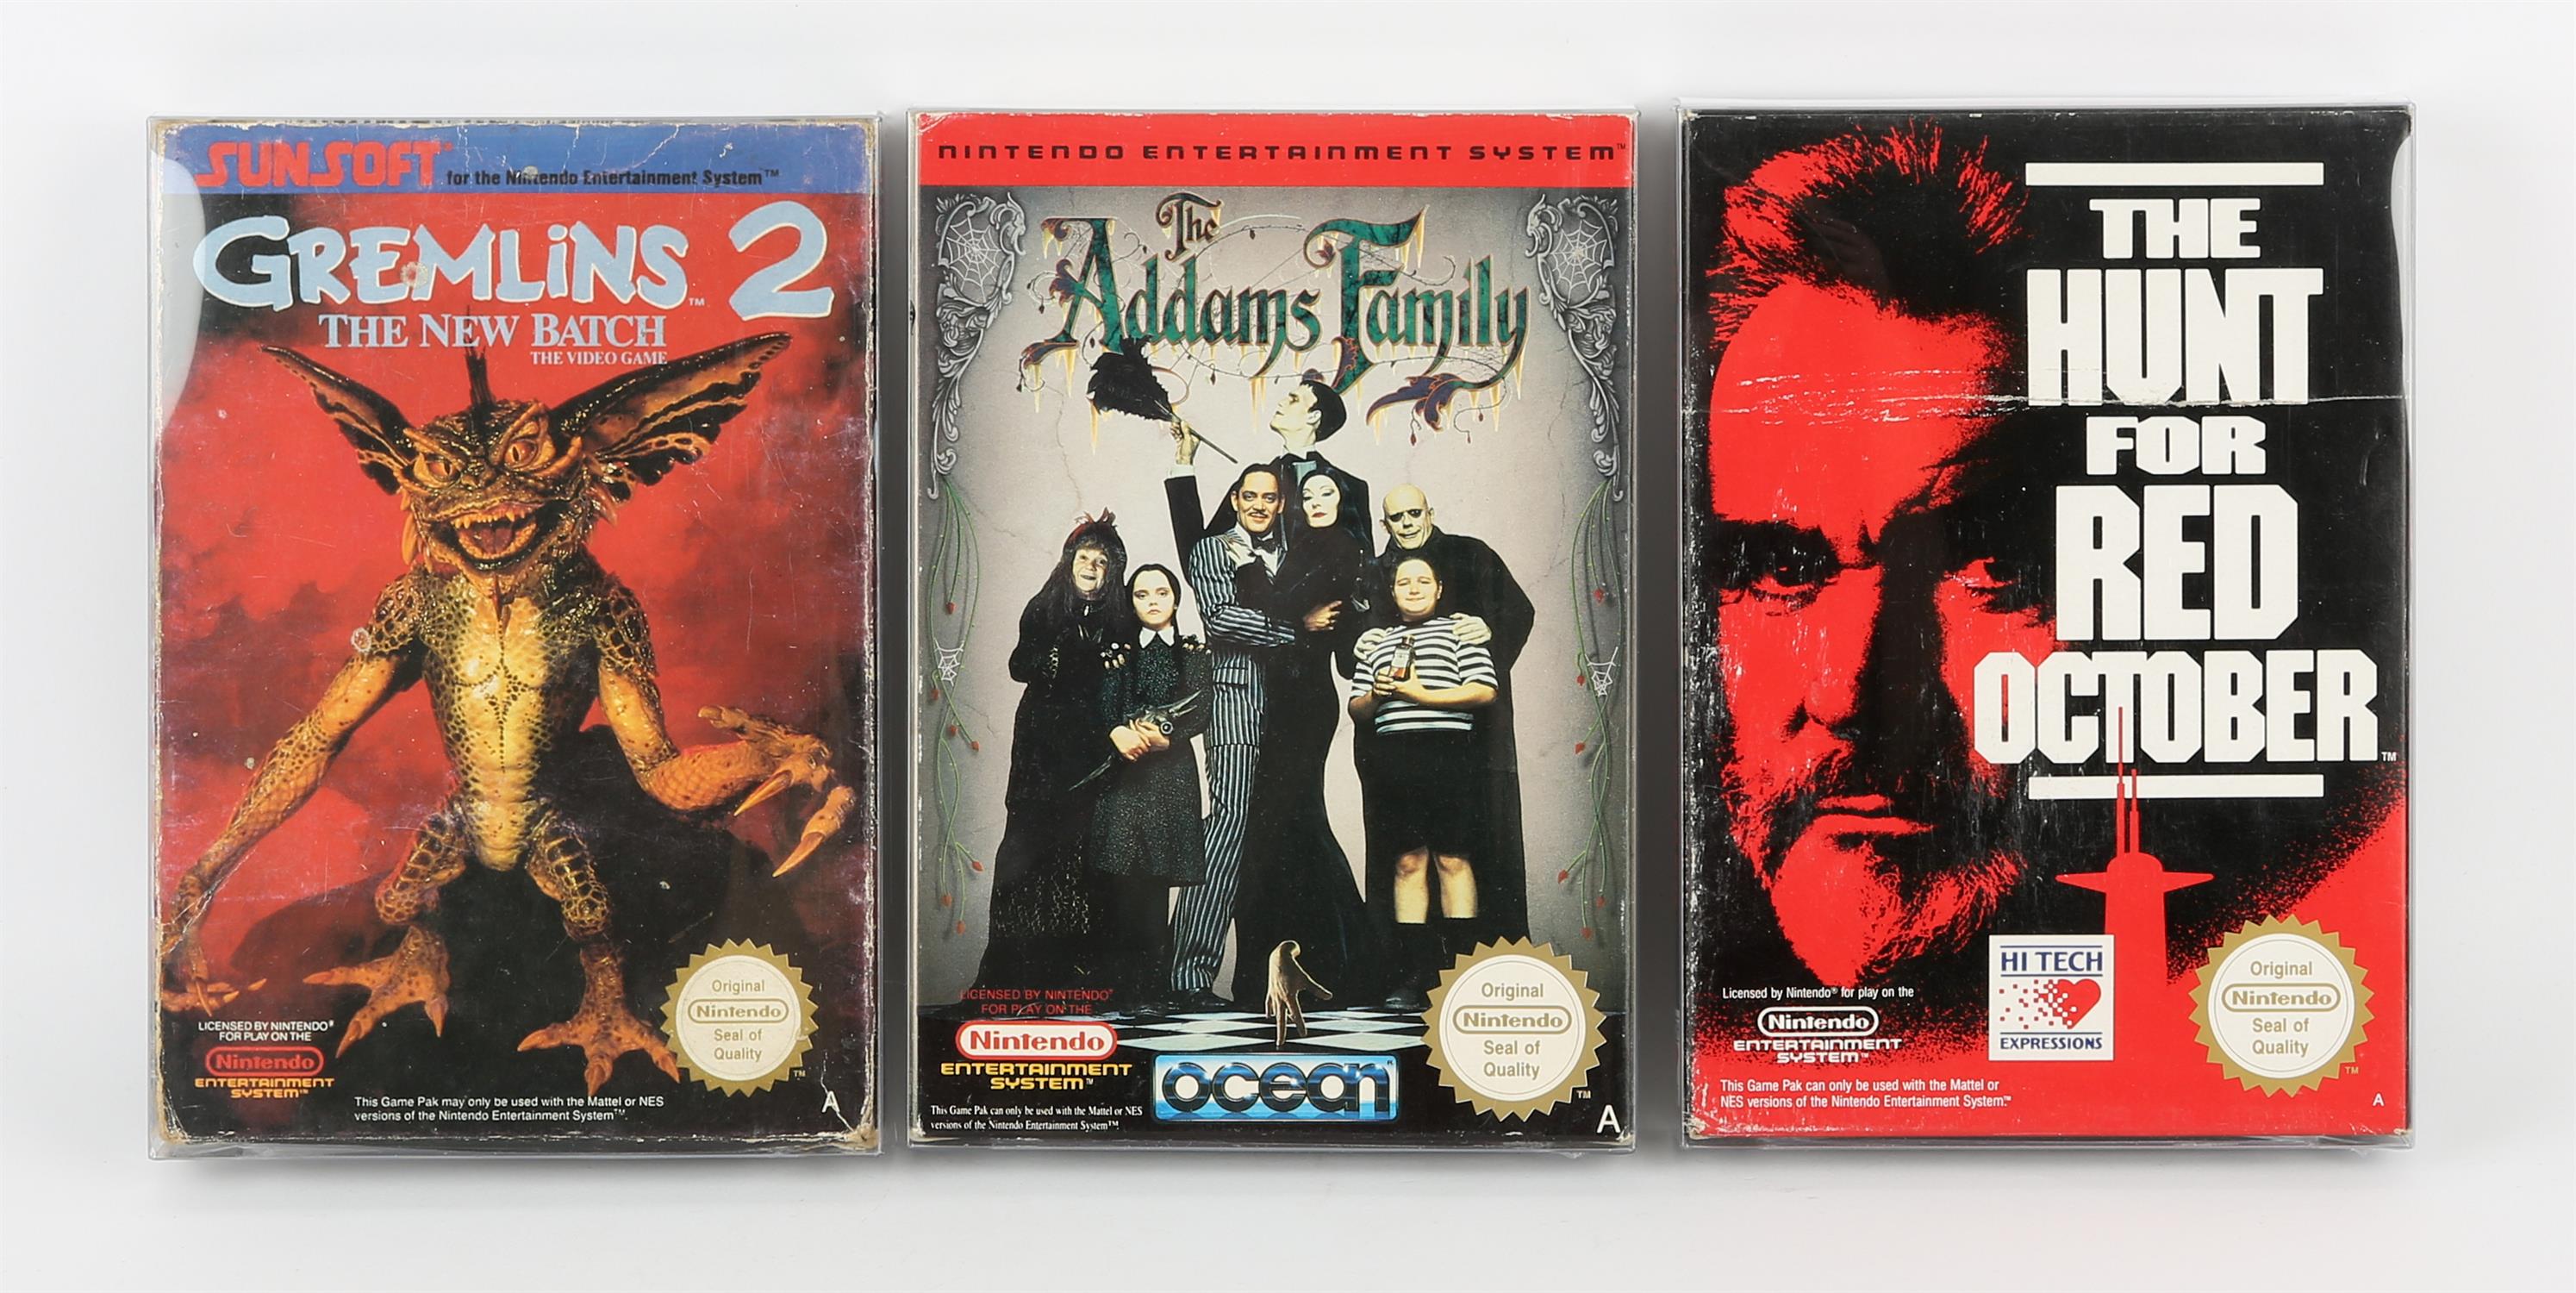 Nintendo Entertainment System (NES) 90s Movie Tie-in bundle Games include: The Addams Family,